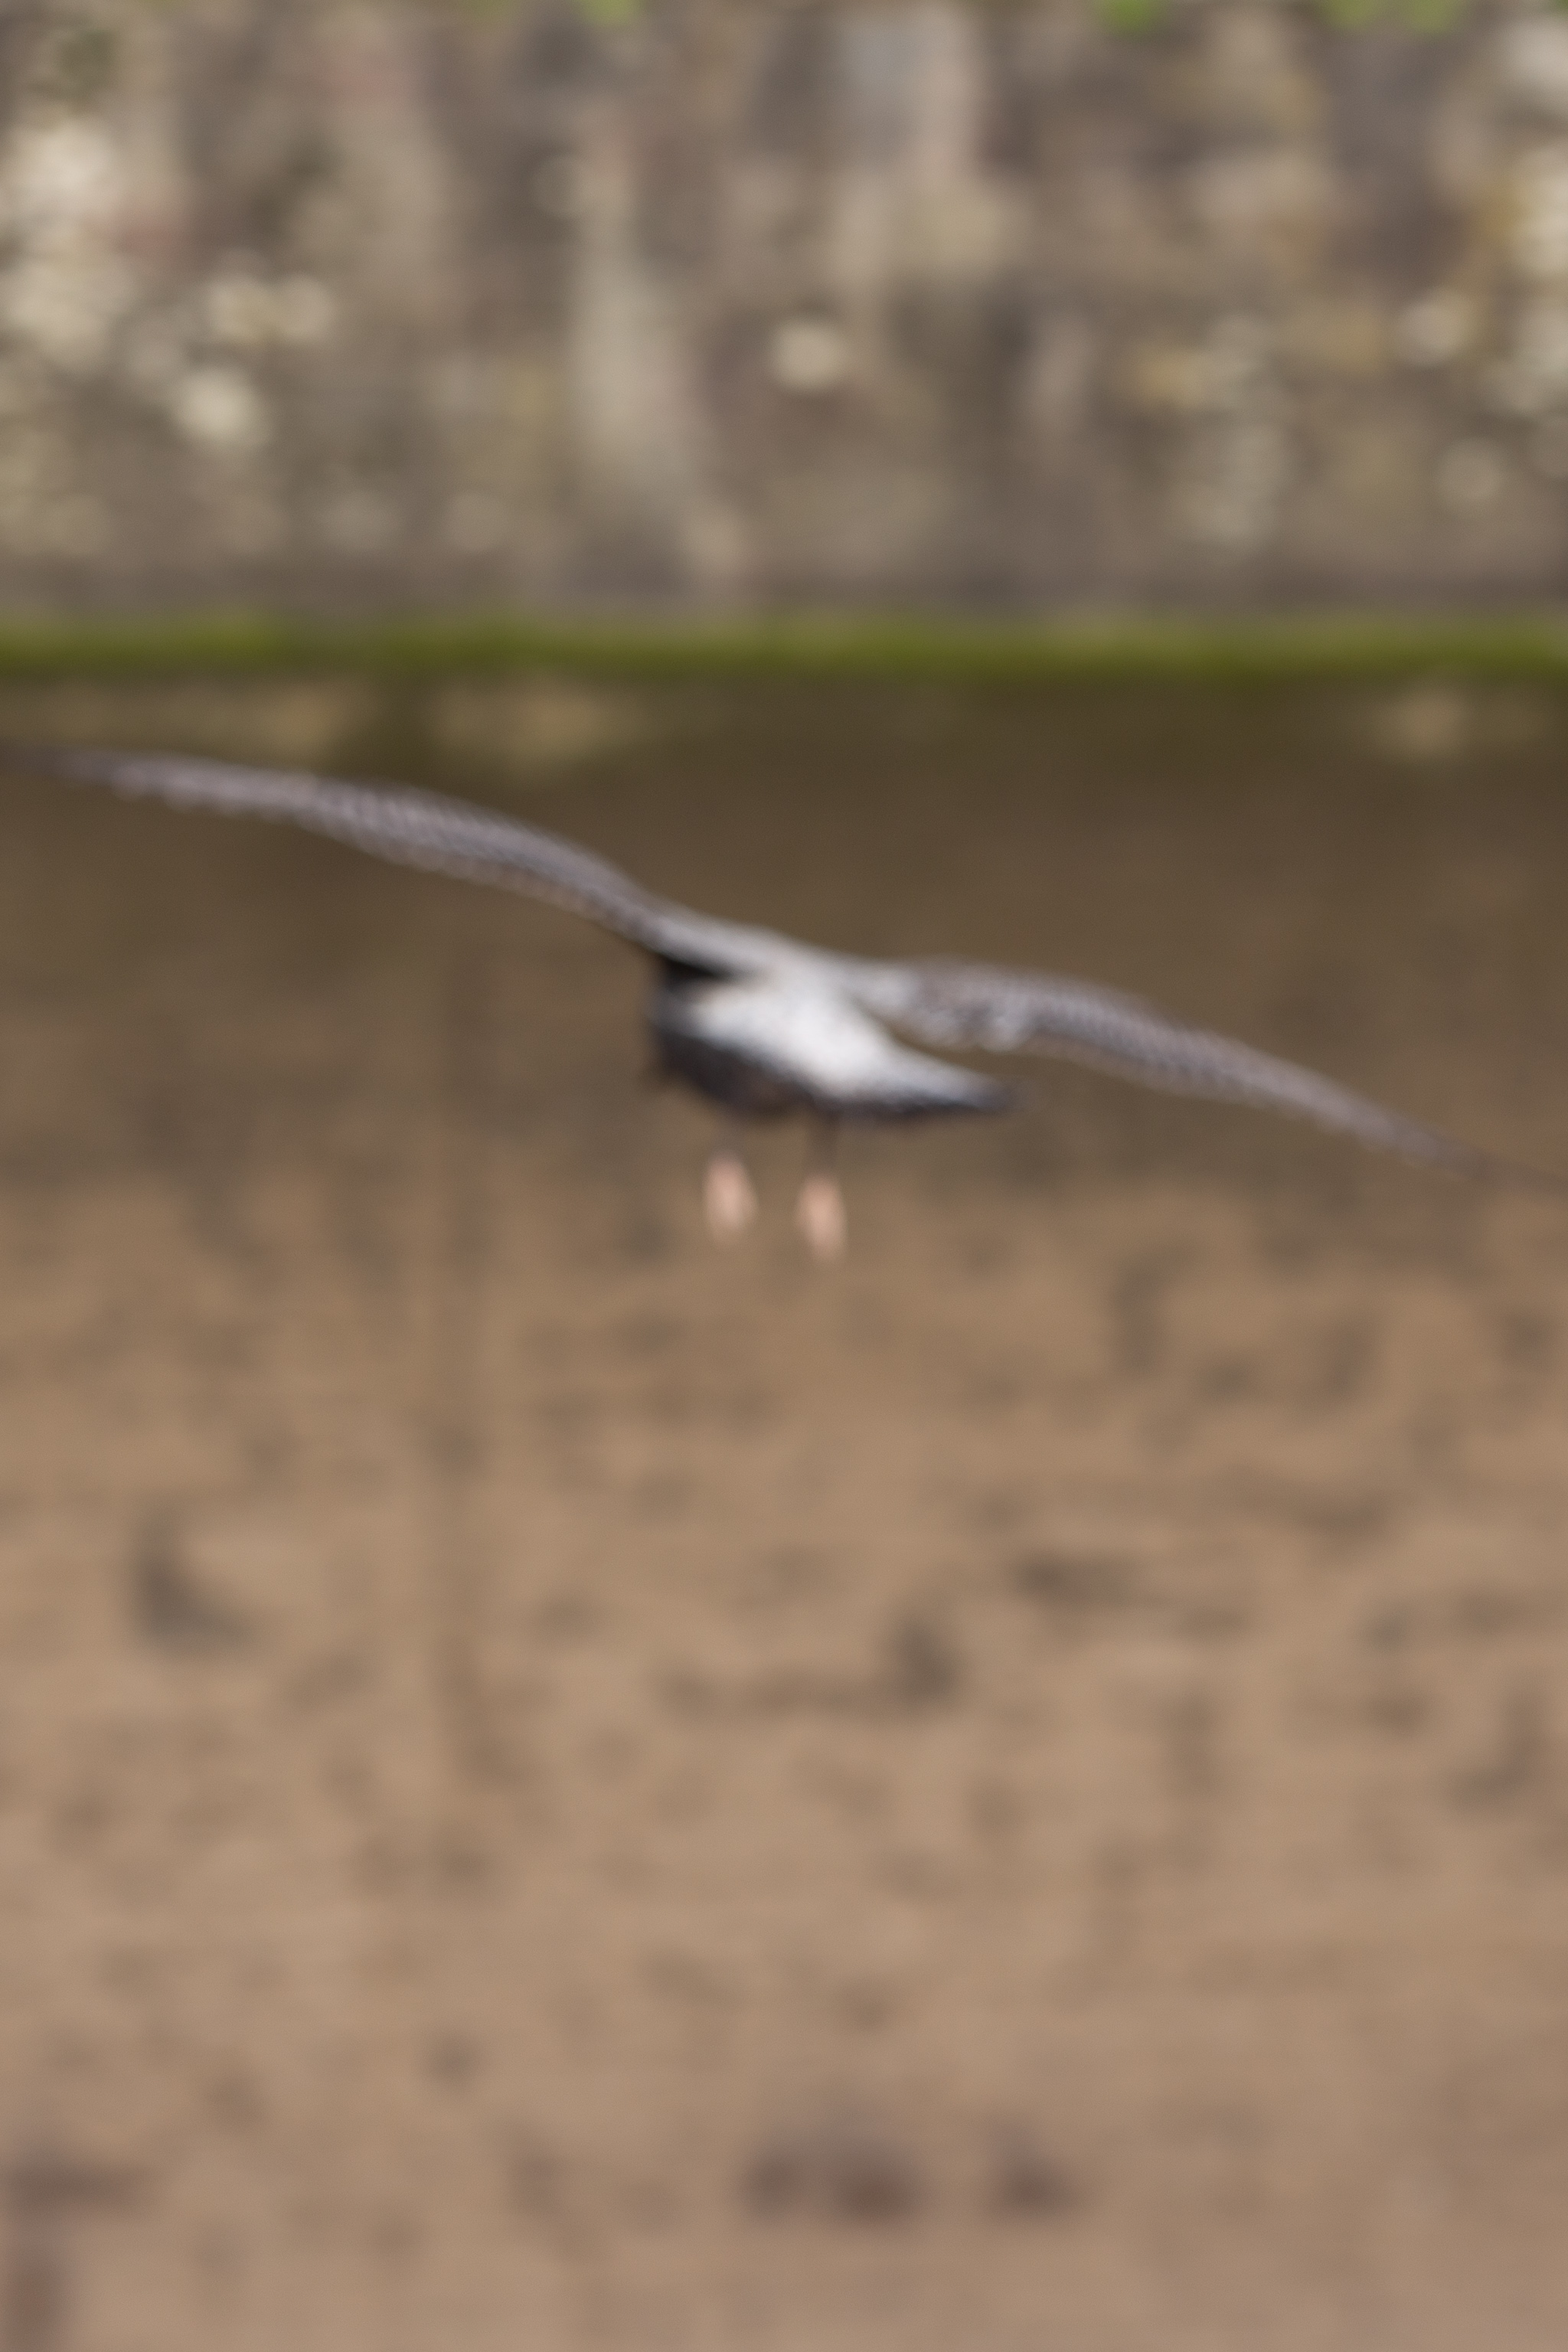 Gull 2
It Does Not Have To Be in Focus
